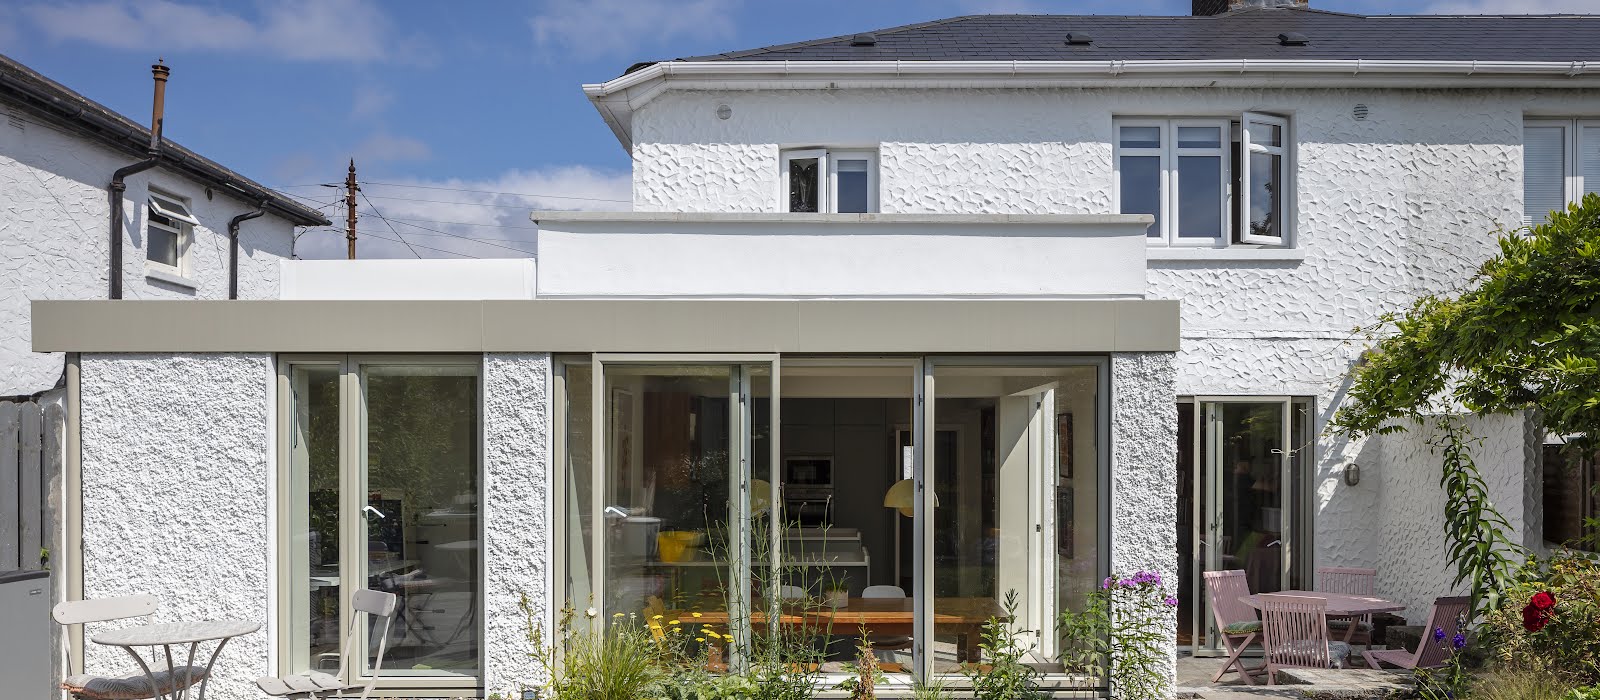 This 1930s Dublin 7 home has been given space, light and plenty of storage thanks to an extension designed around family life